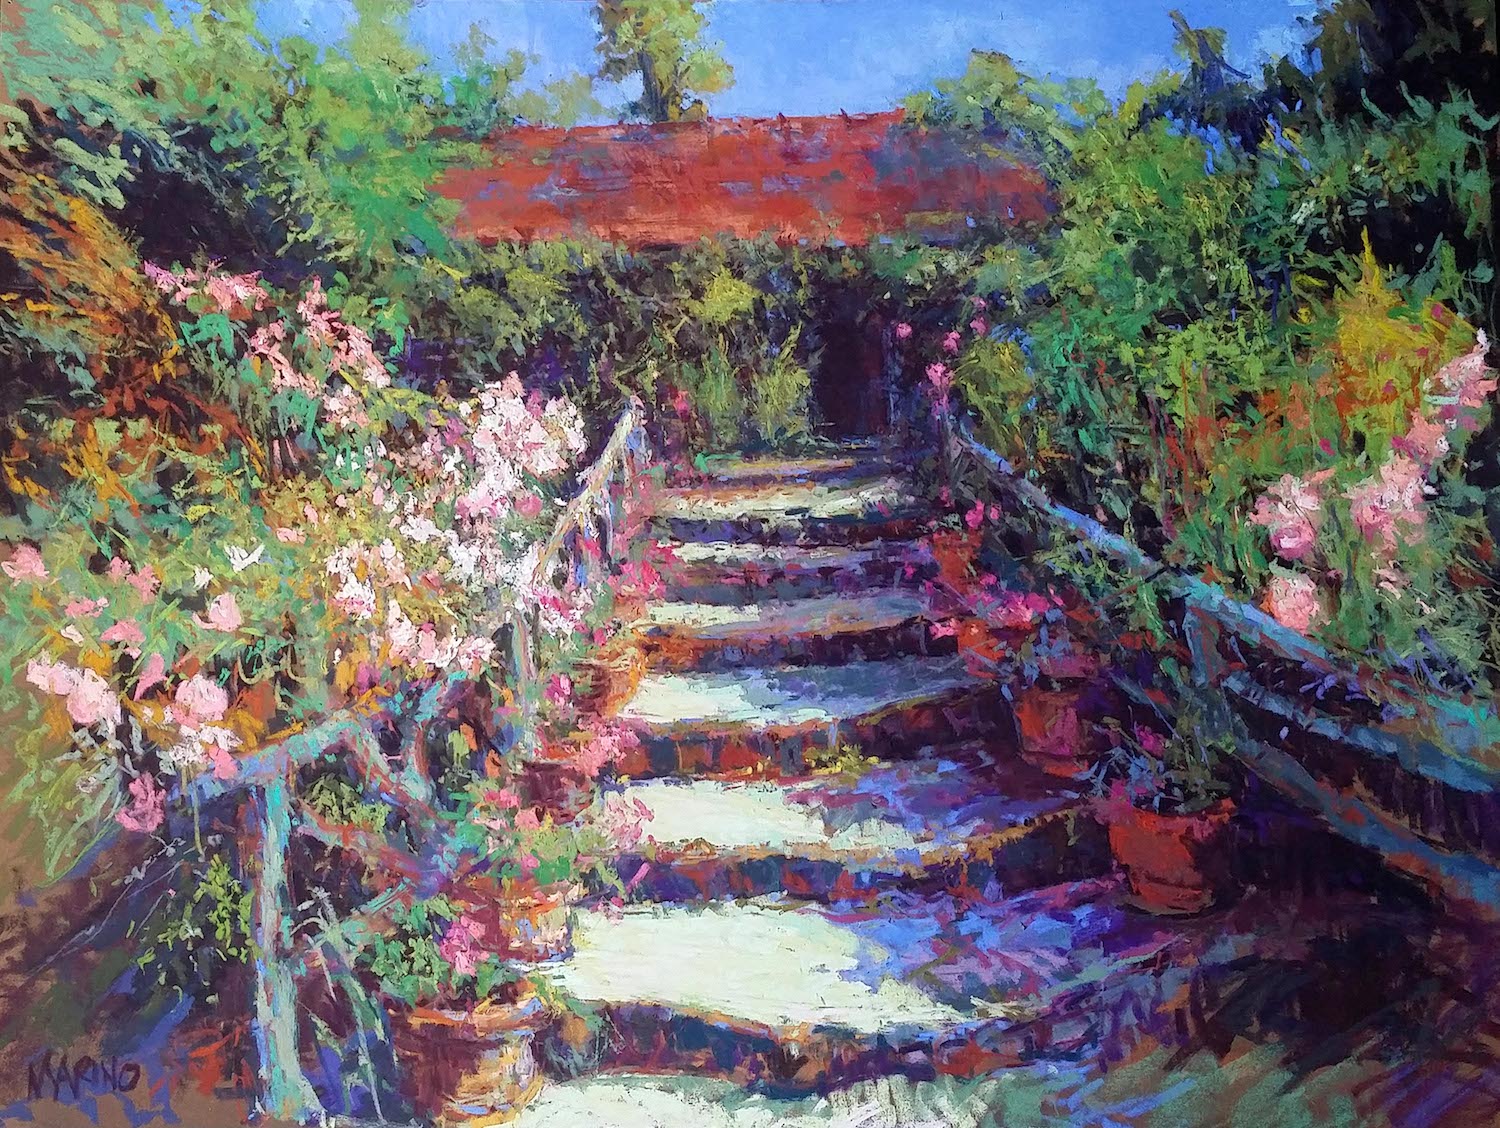 Maria Marino, "The Breath of Spring," 2015, pastel on Sennelier LaCarte paper, 24 x 31 in. Sold. Painted from a photo of a view of an artist’s atelier located in the rear of Hotel Baudy-Giverny.